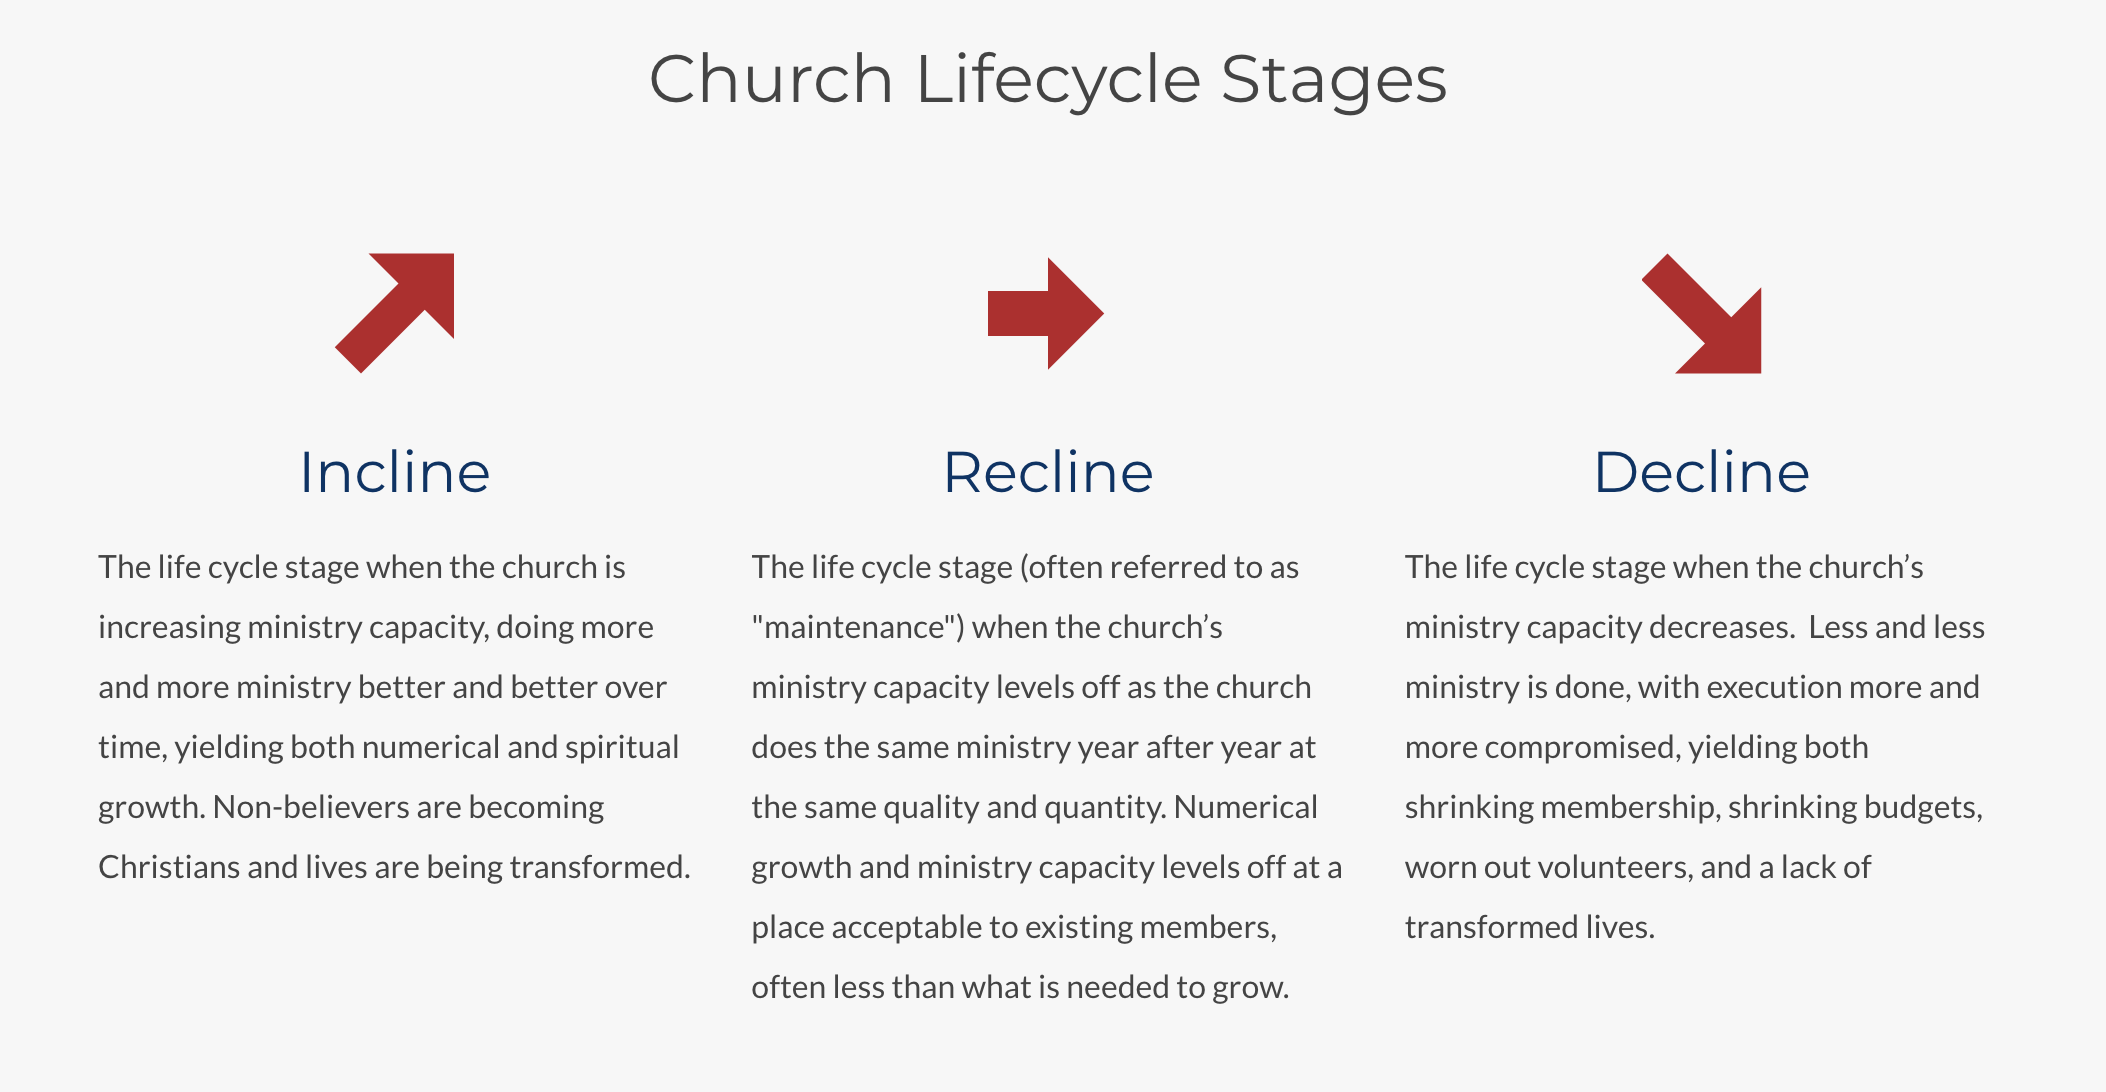 Church lifecycle stages